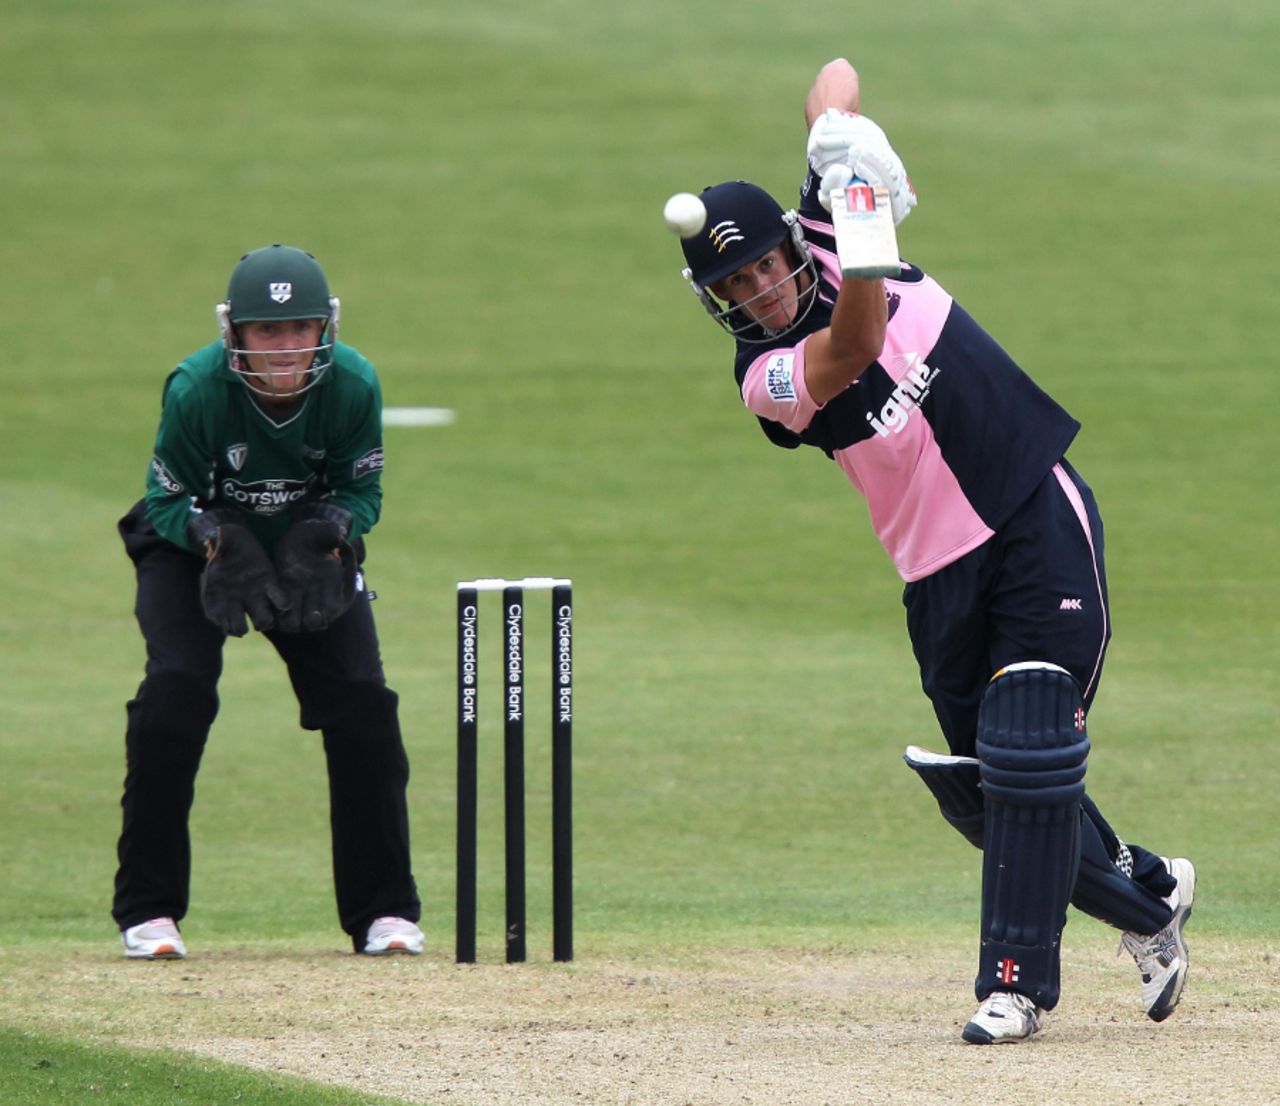 Neil Dexter top-scored with 48 for Middlesex, Worcestershire v Middlesex, Clydesdale Bank 40, New Road, April 24 2011